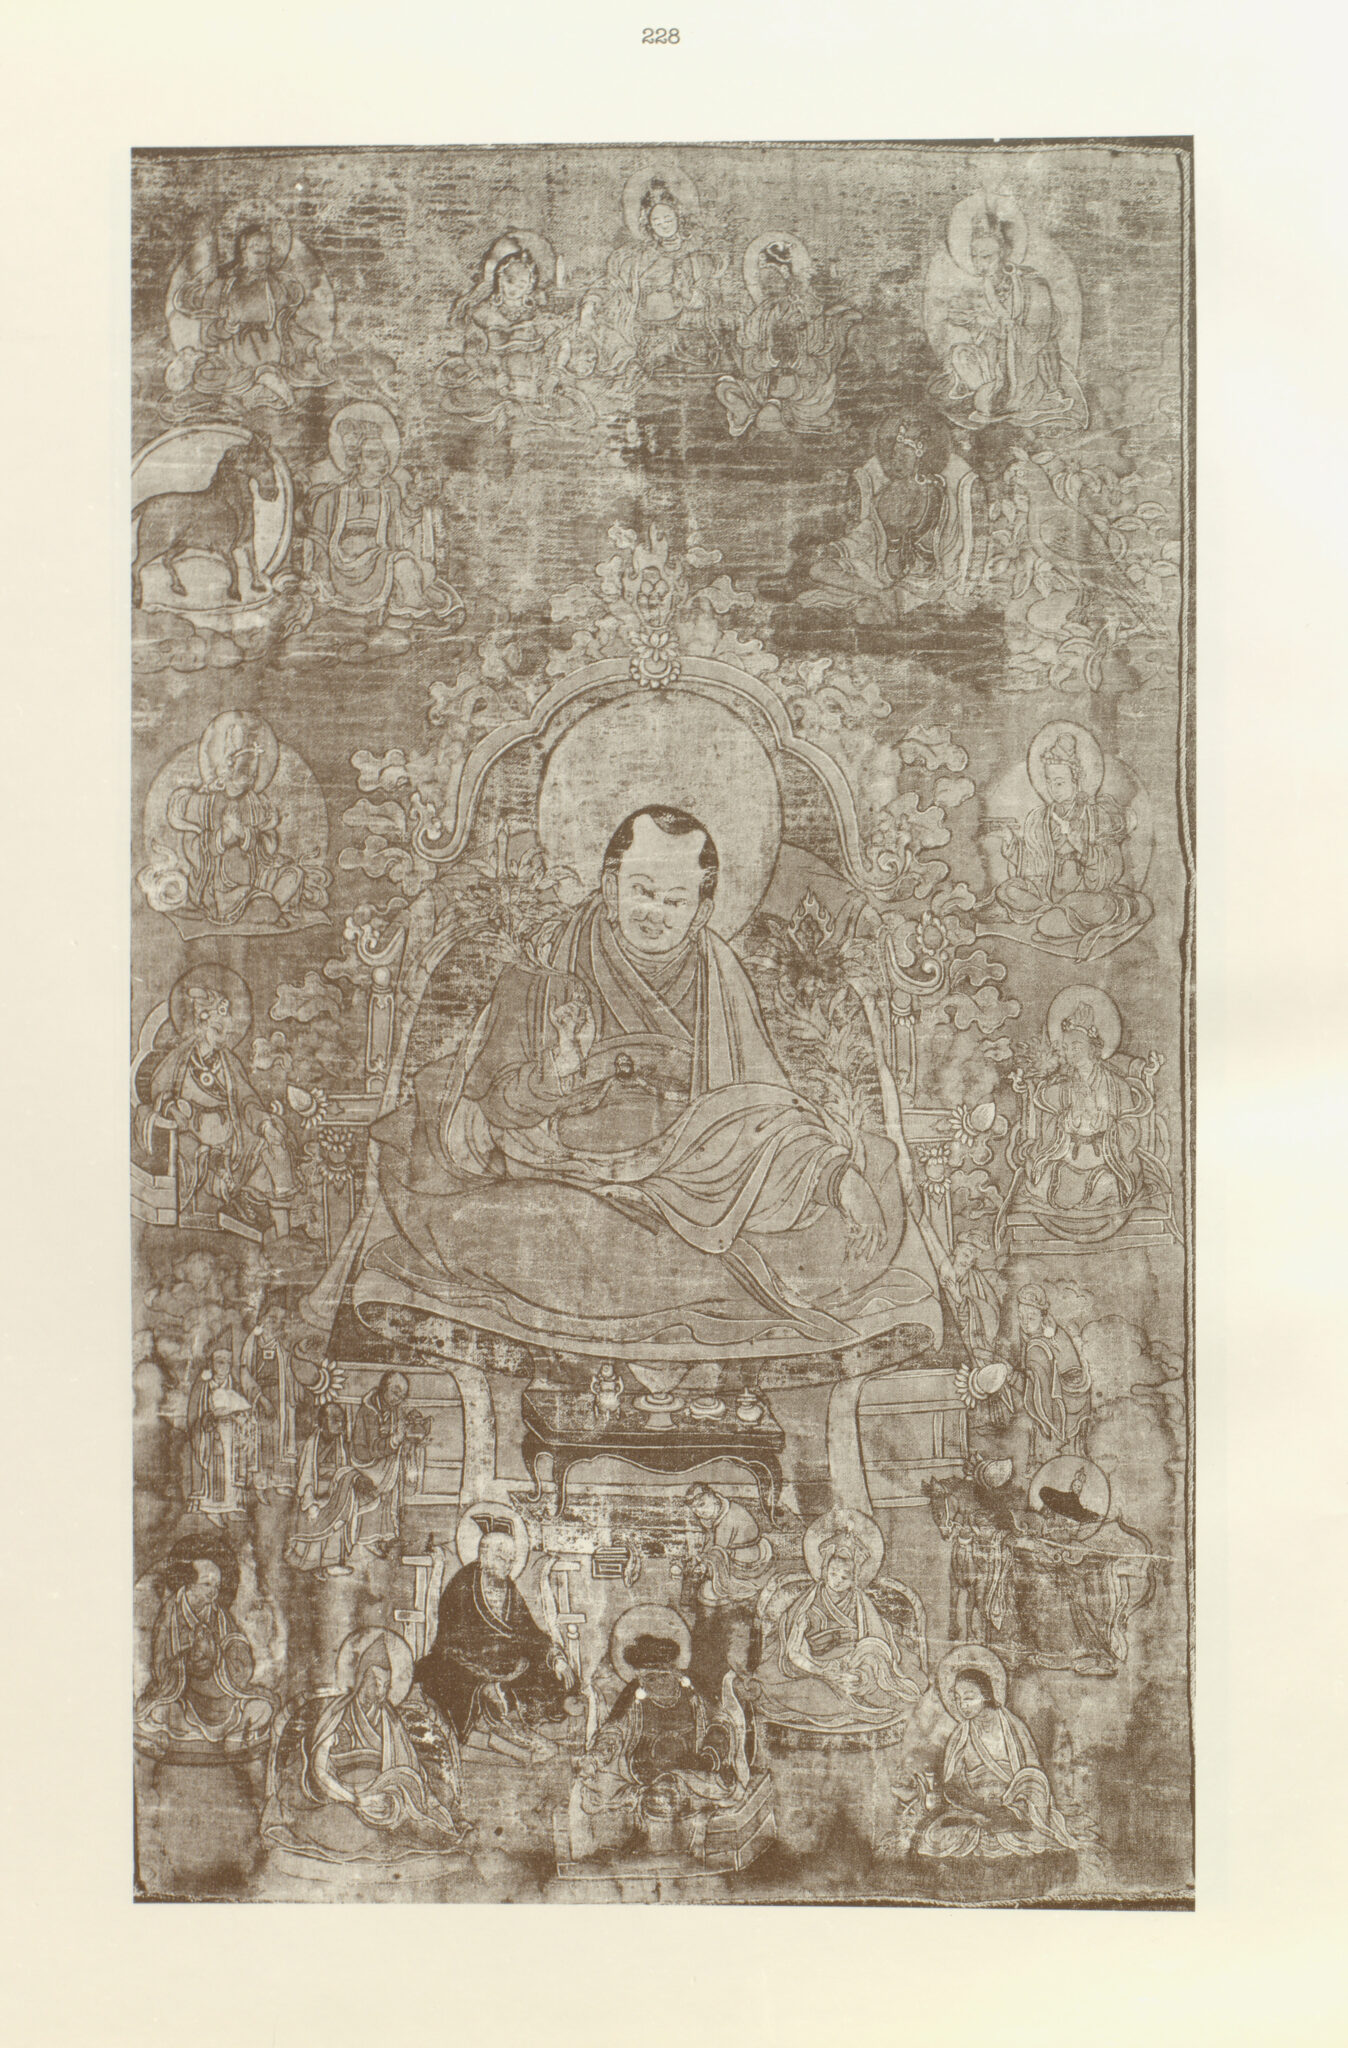 Monochrome woodblock print depicting seated regent gazing below at attendants, surrounded above by deity portraits